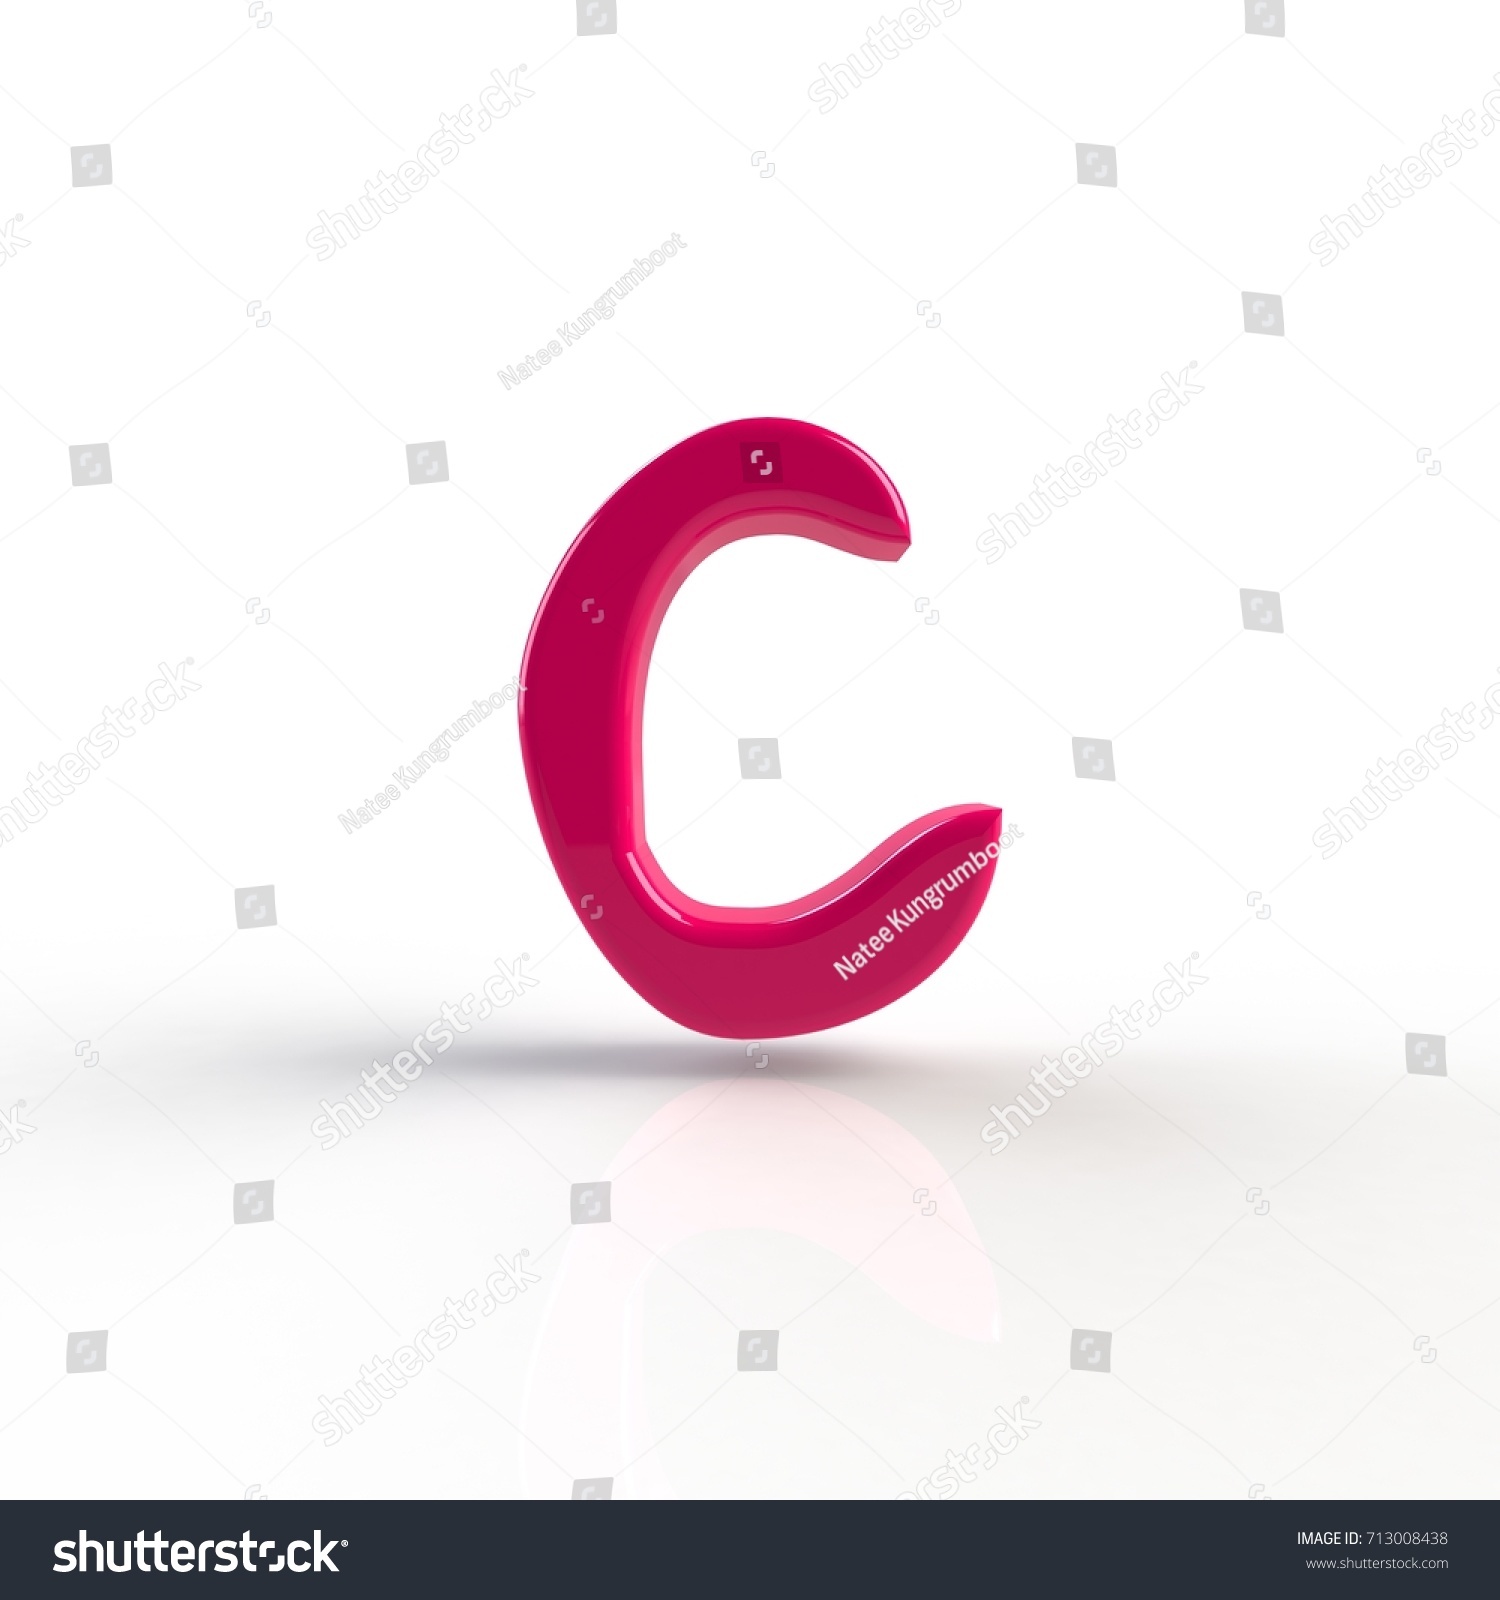 Shiny Plastic Pink Lowercase Or Small Letter C In A 3d Illustration